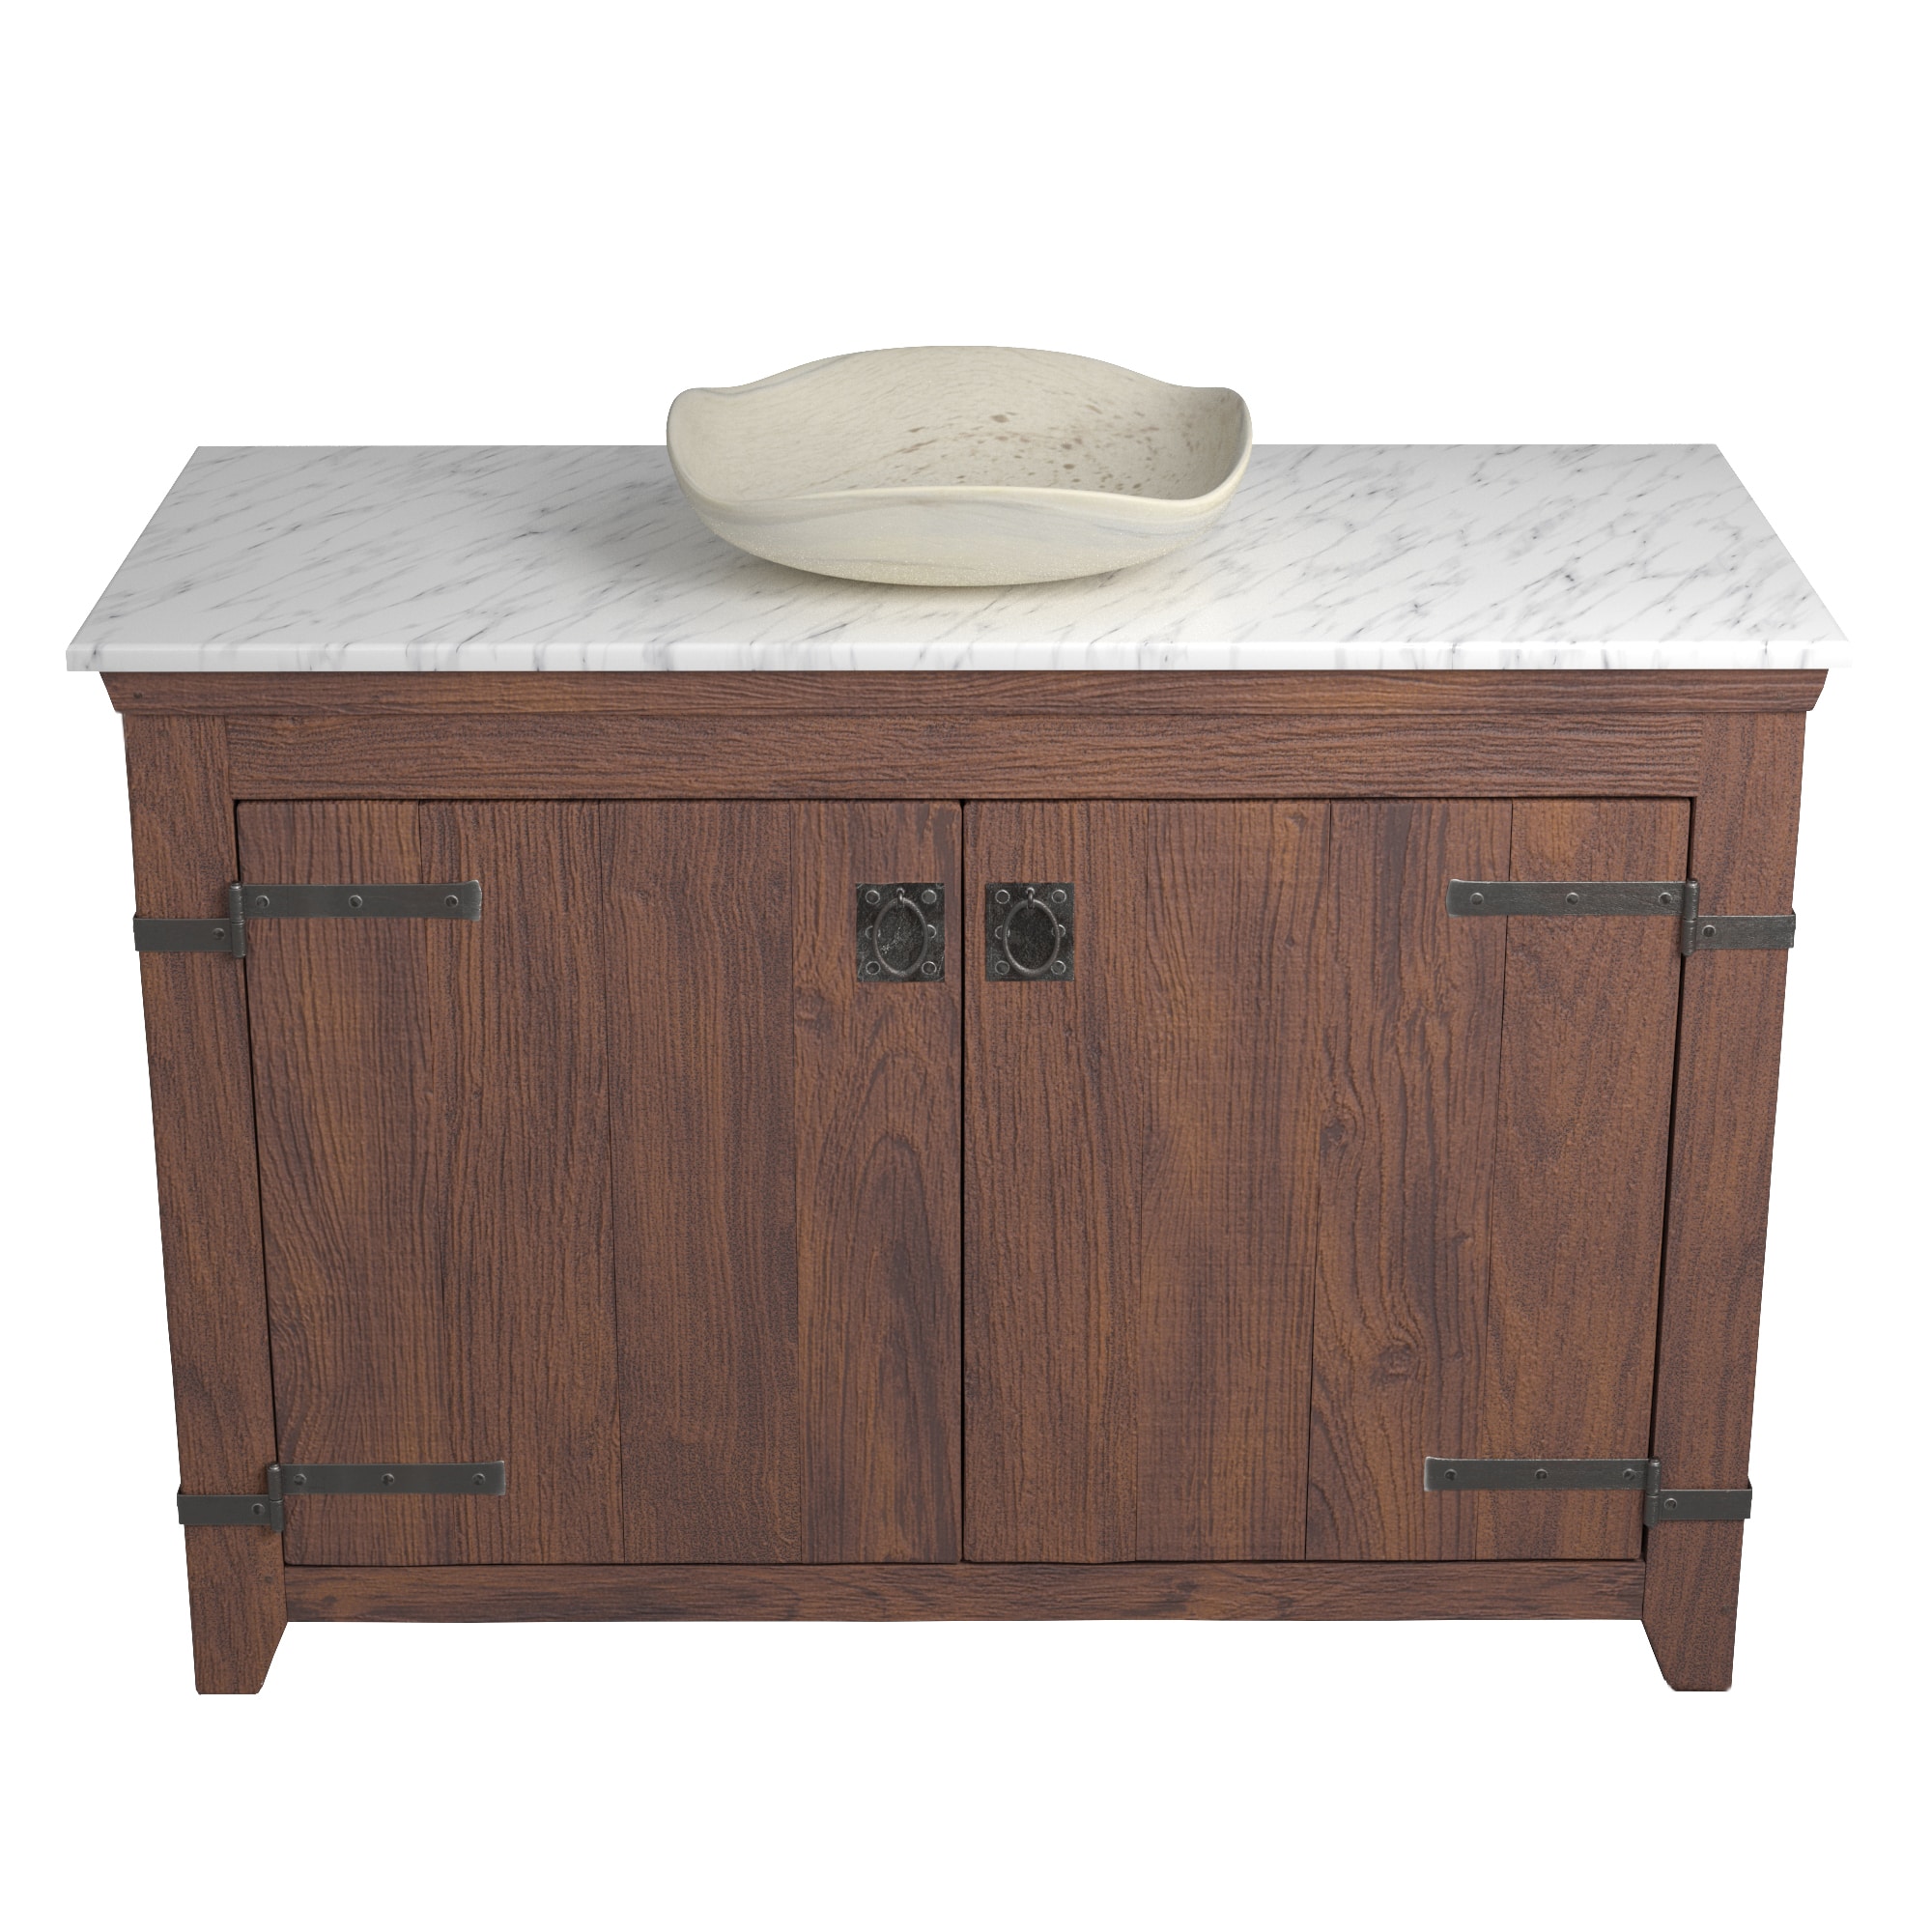 Native Trails 48" Americana Vanity in Chestnut with Carrara Marble Top and Lido in Beachcomber, No Faucet Hole, BND48-VB-CT-MG-020